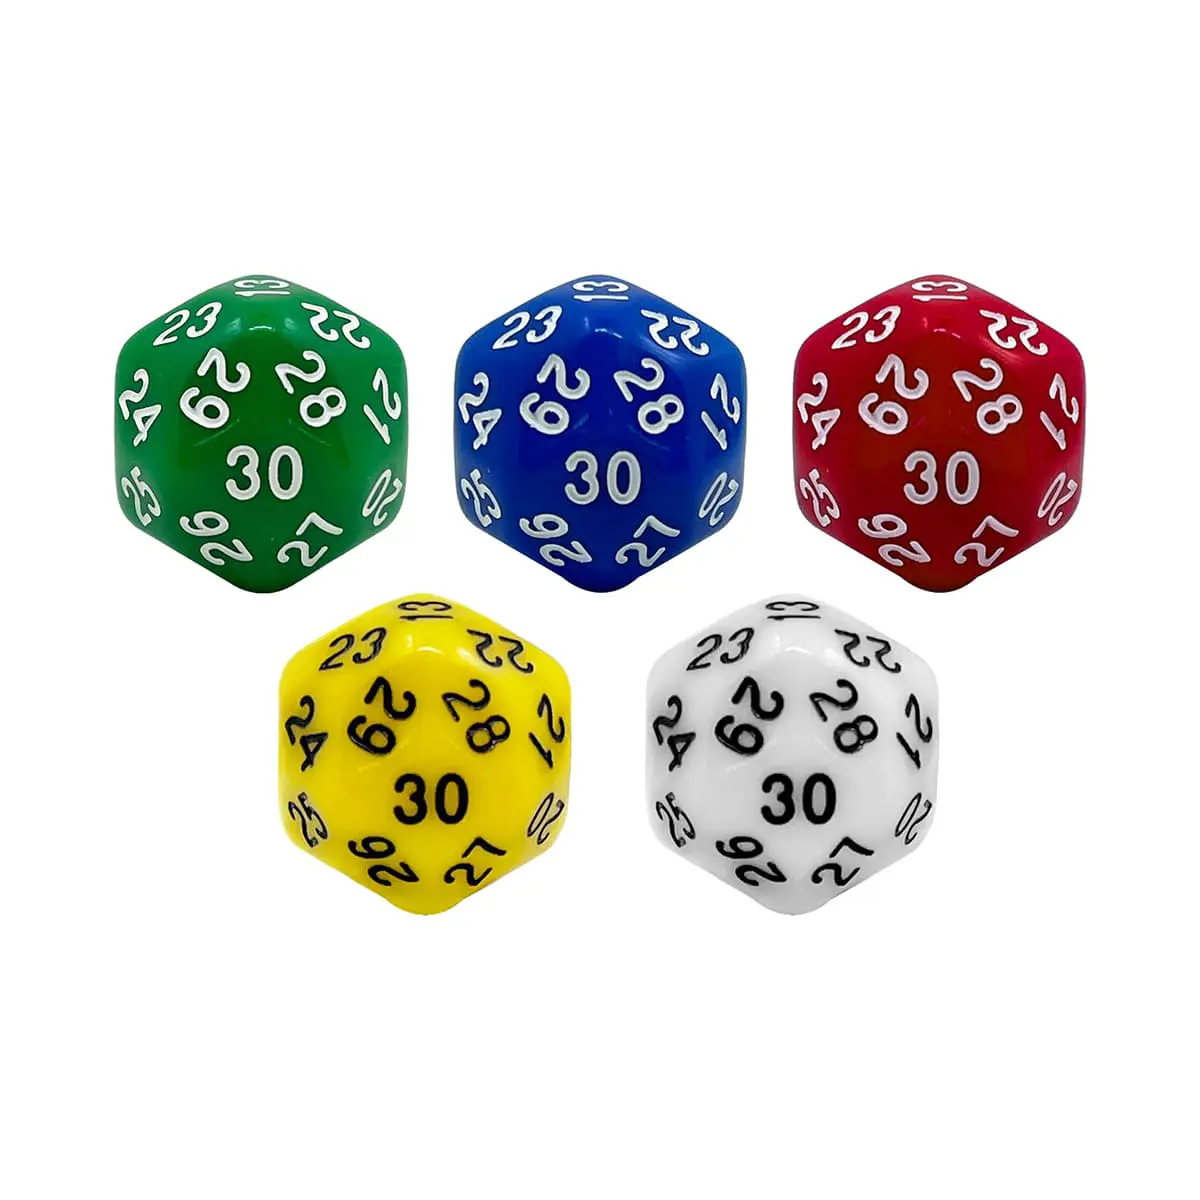 30 Sided Game Dice